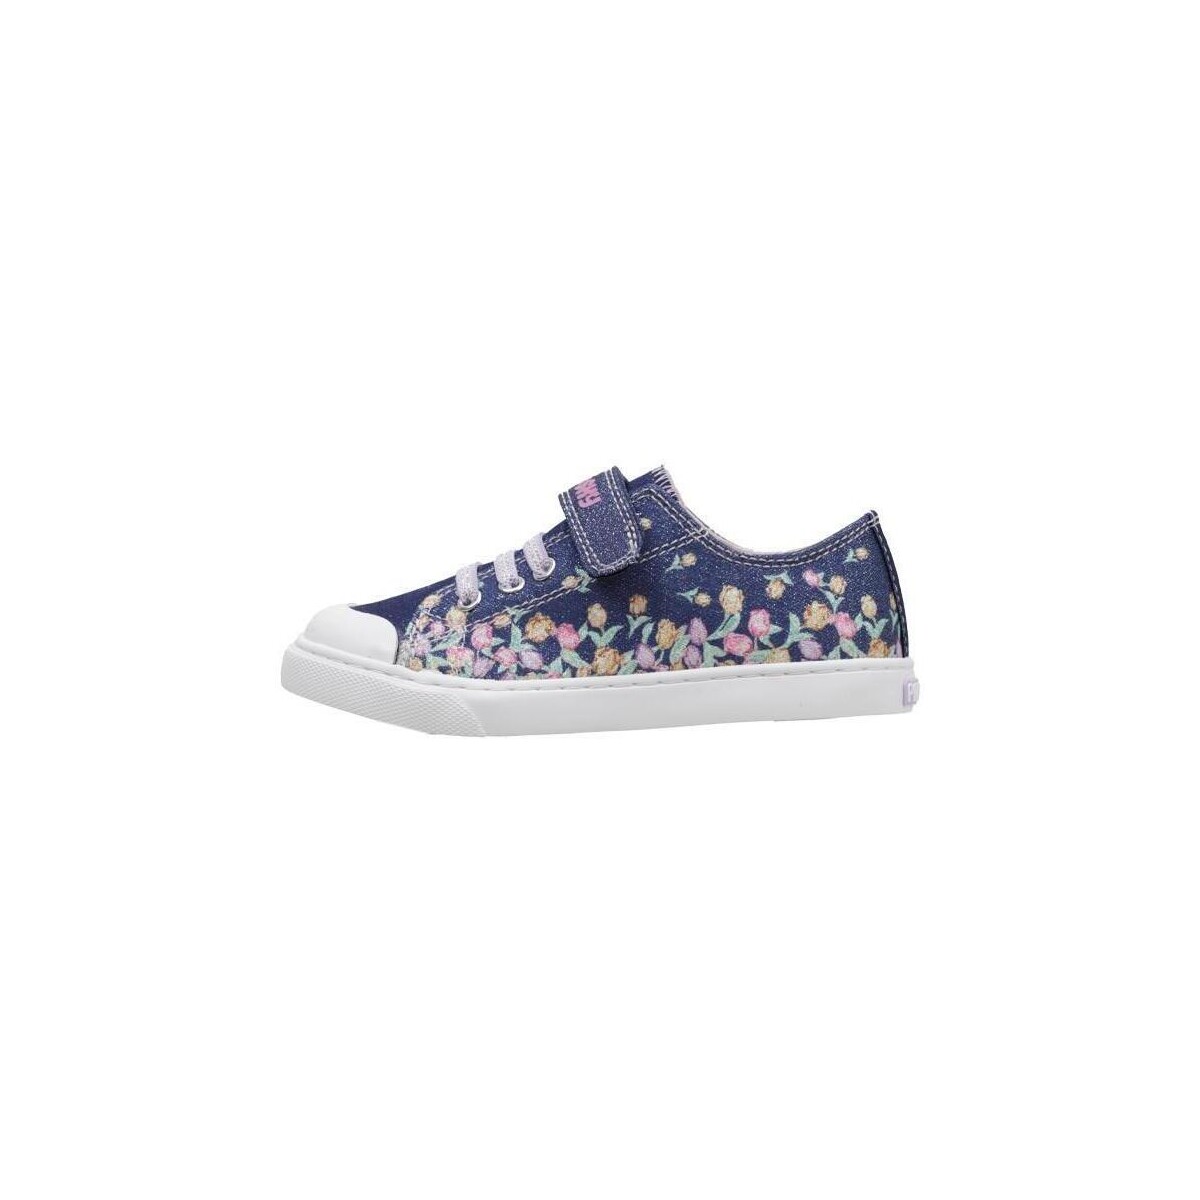 Chaussures Fille Baskets basses Pablosky 976420 Marine